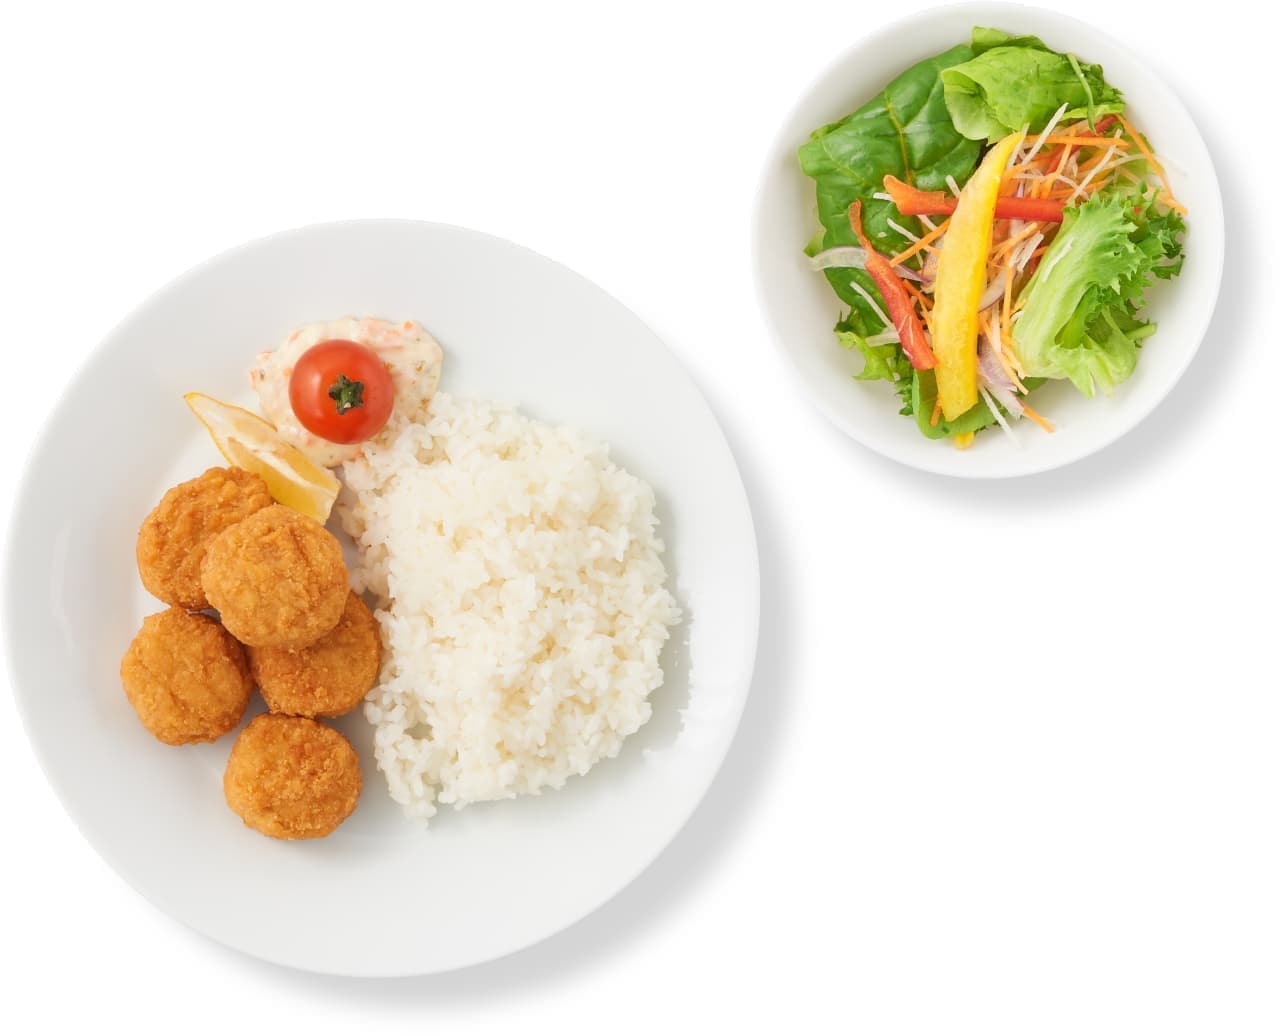 IKEA "New Life Support One-Coin Set Plant-Based Fried Plate with Salad"